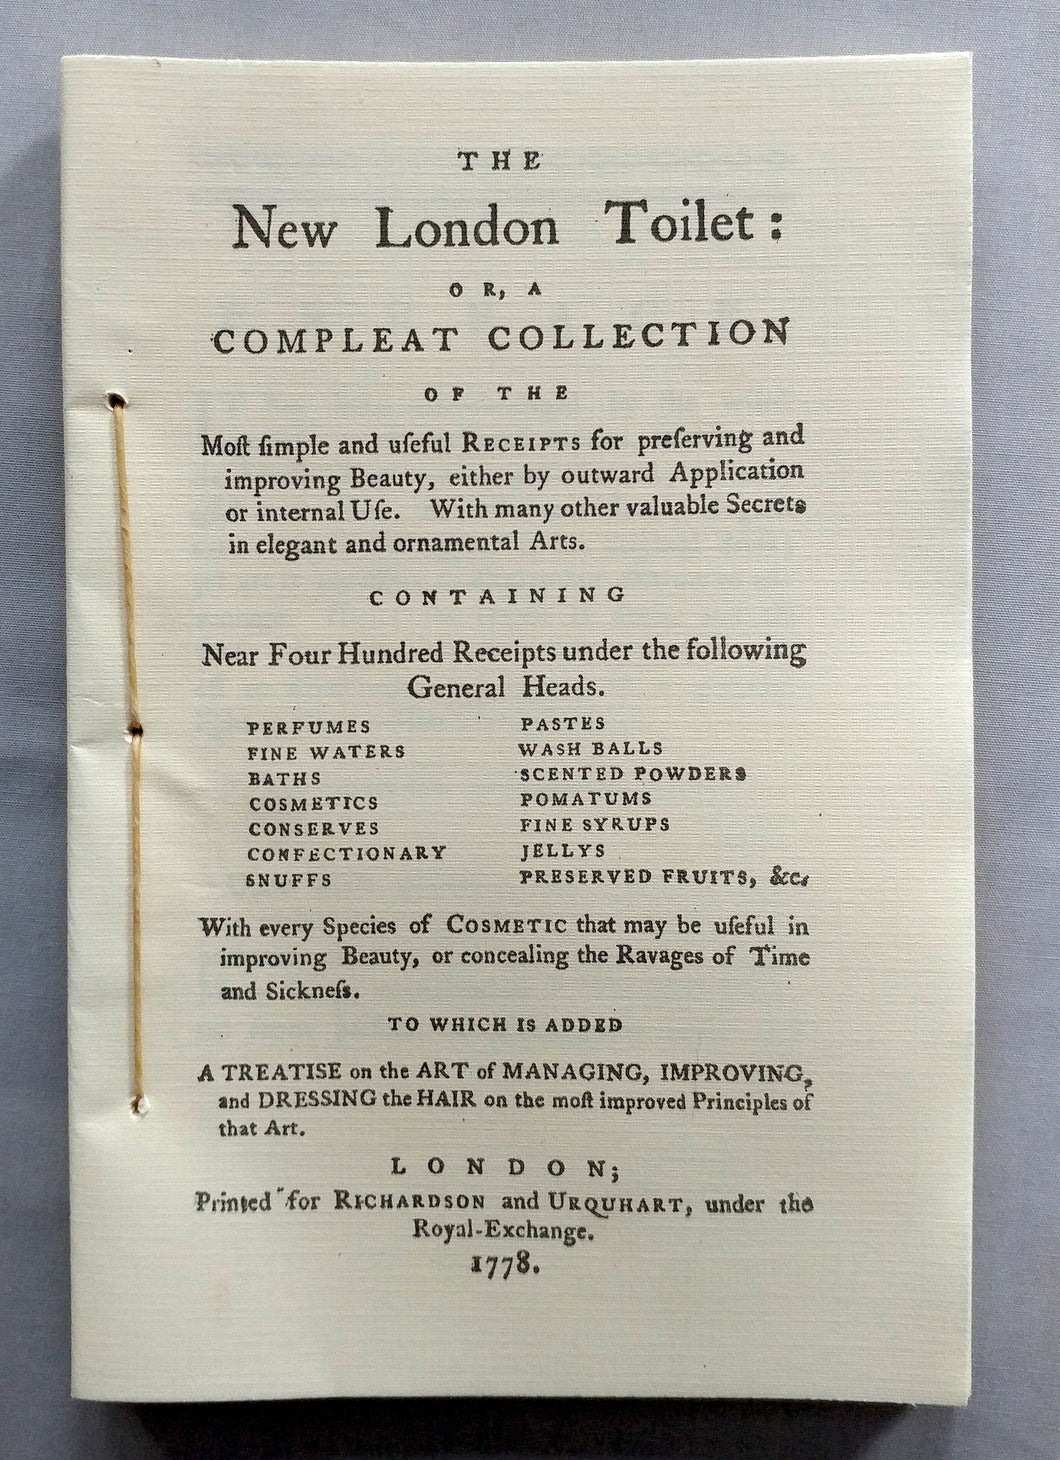 The New London Toilet